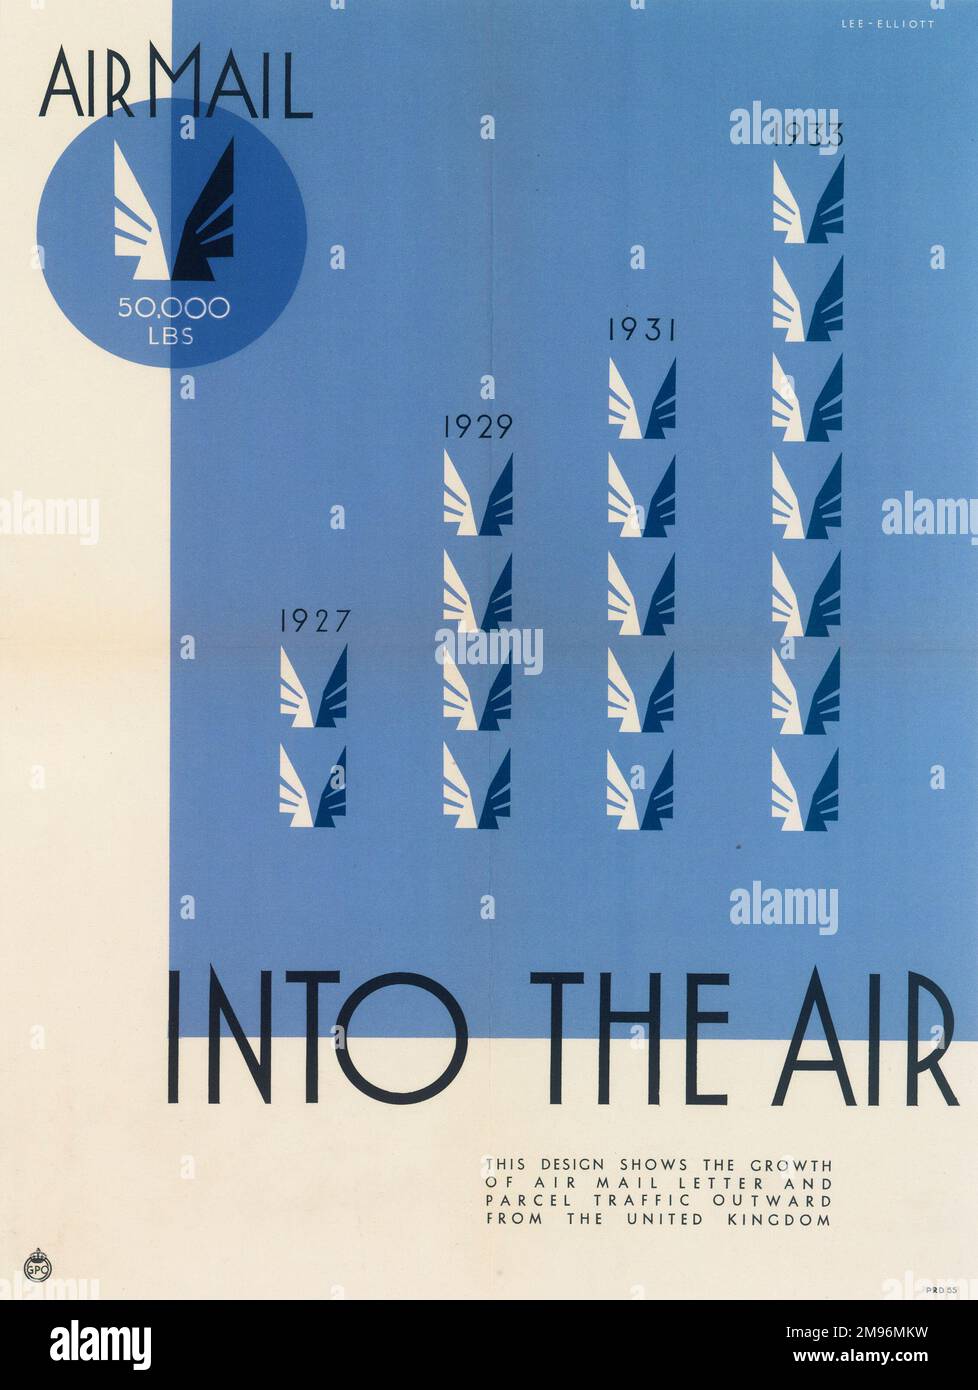 GPO Airmail Poster, Into the Air, depicting the growth in the use of air mail for letters and parcels from the UK from 1927 to 1933. Stock Photo